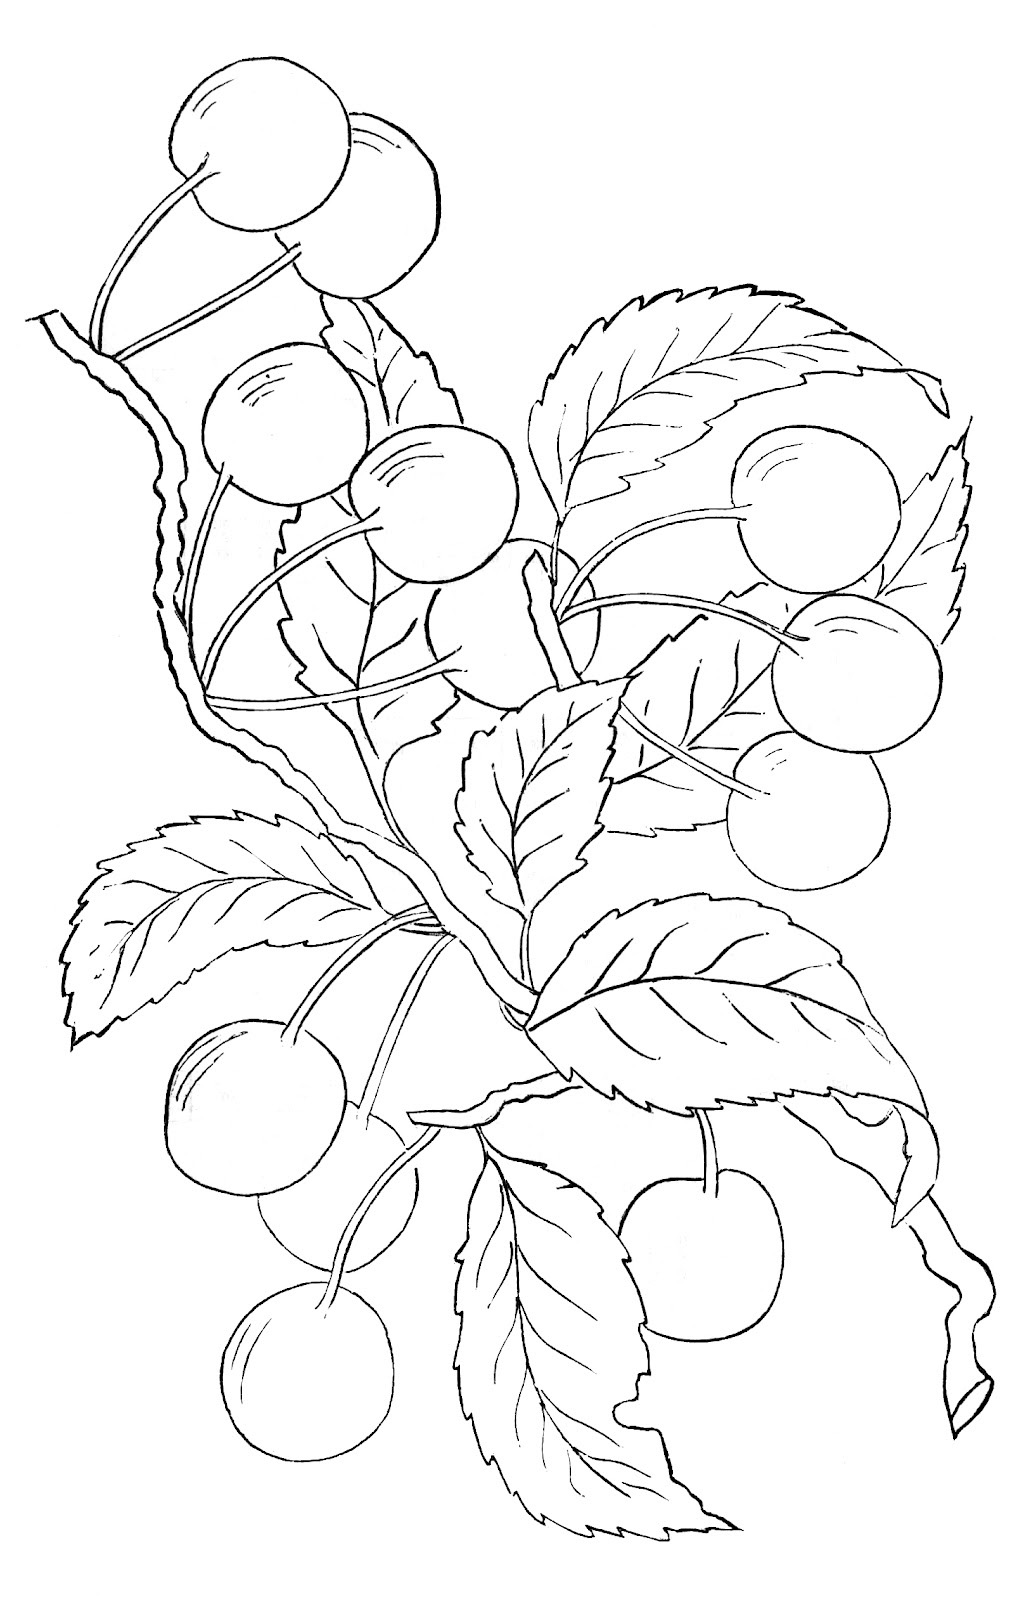 Black and White Cherry Embroidery Pattern